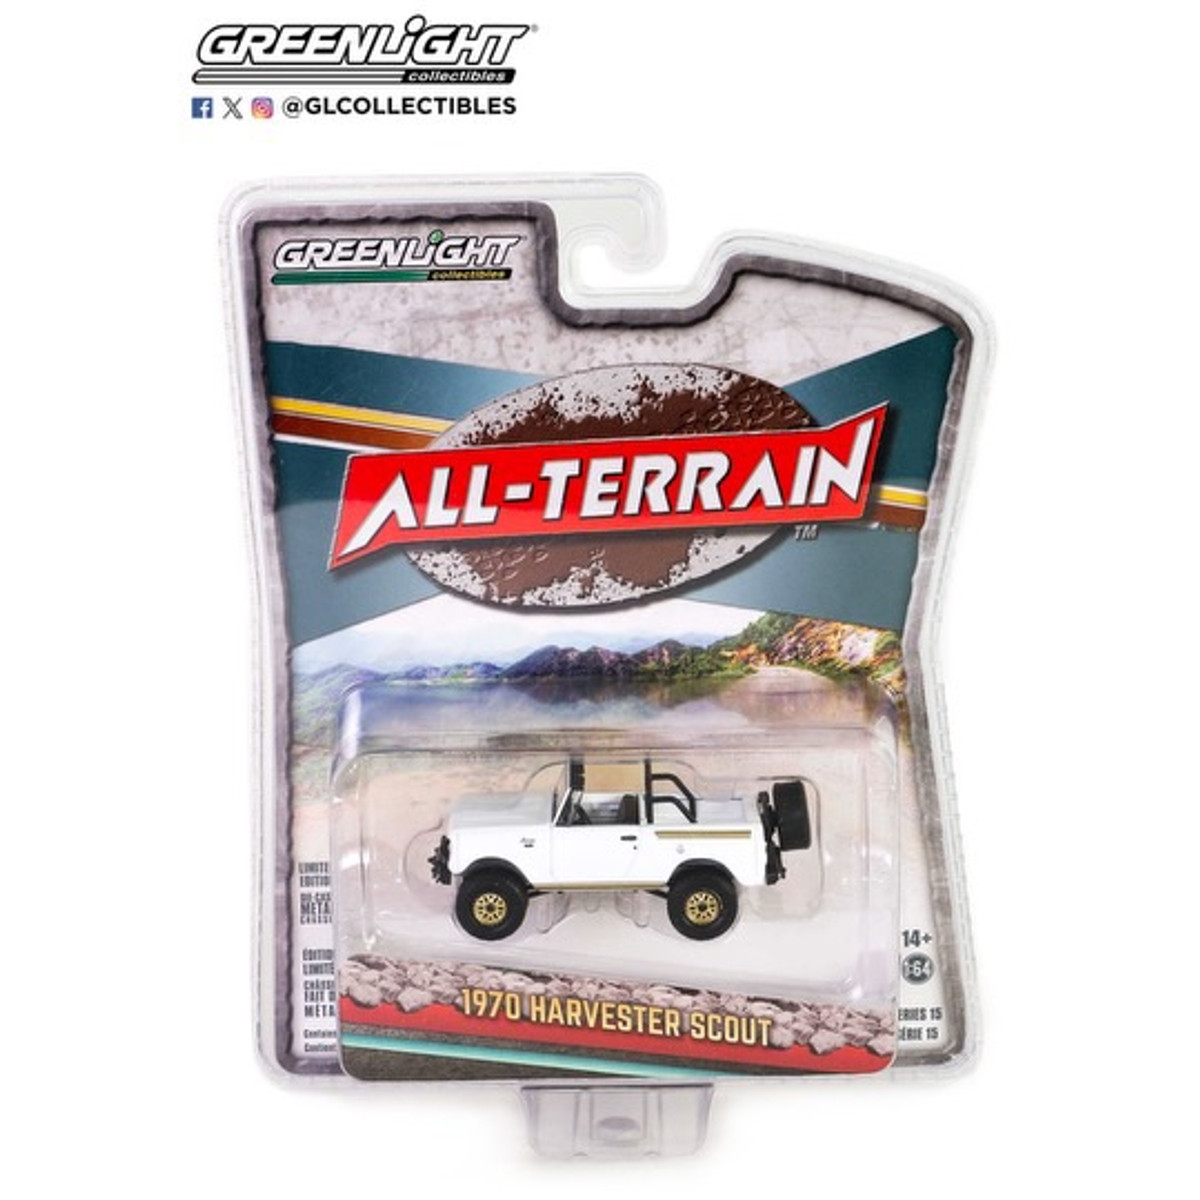 Greenlight All -Terrain 1970 Harvester Scout Series 15